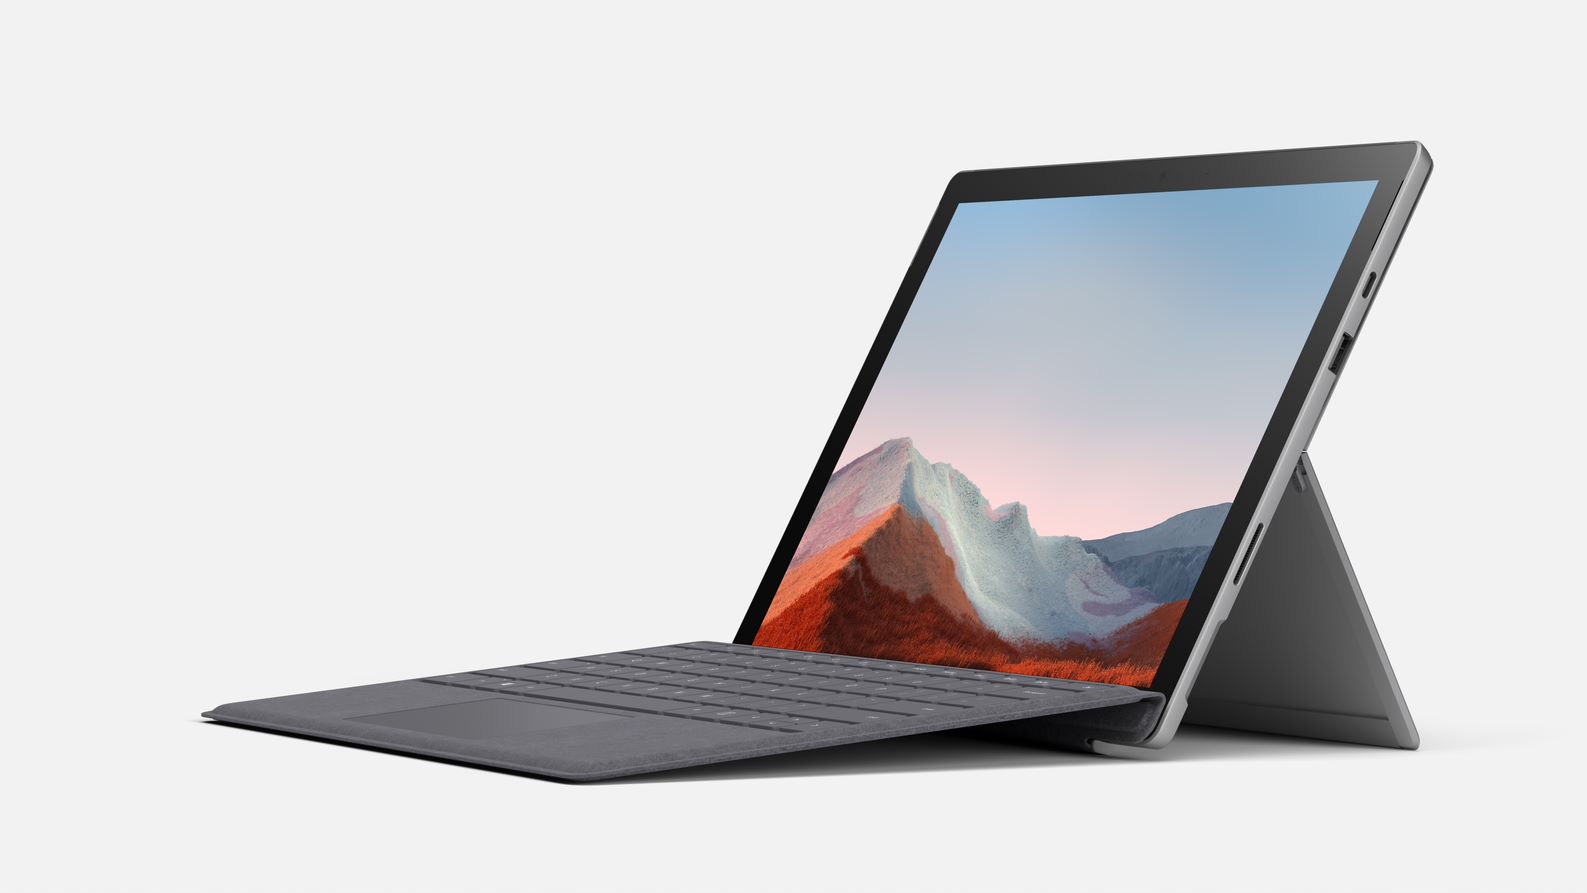 What Is The Price Of Microsoft Surface Tablet